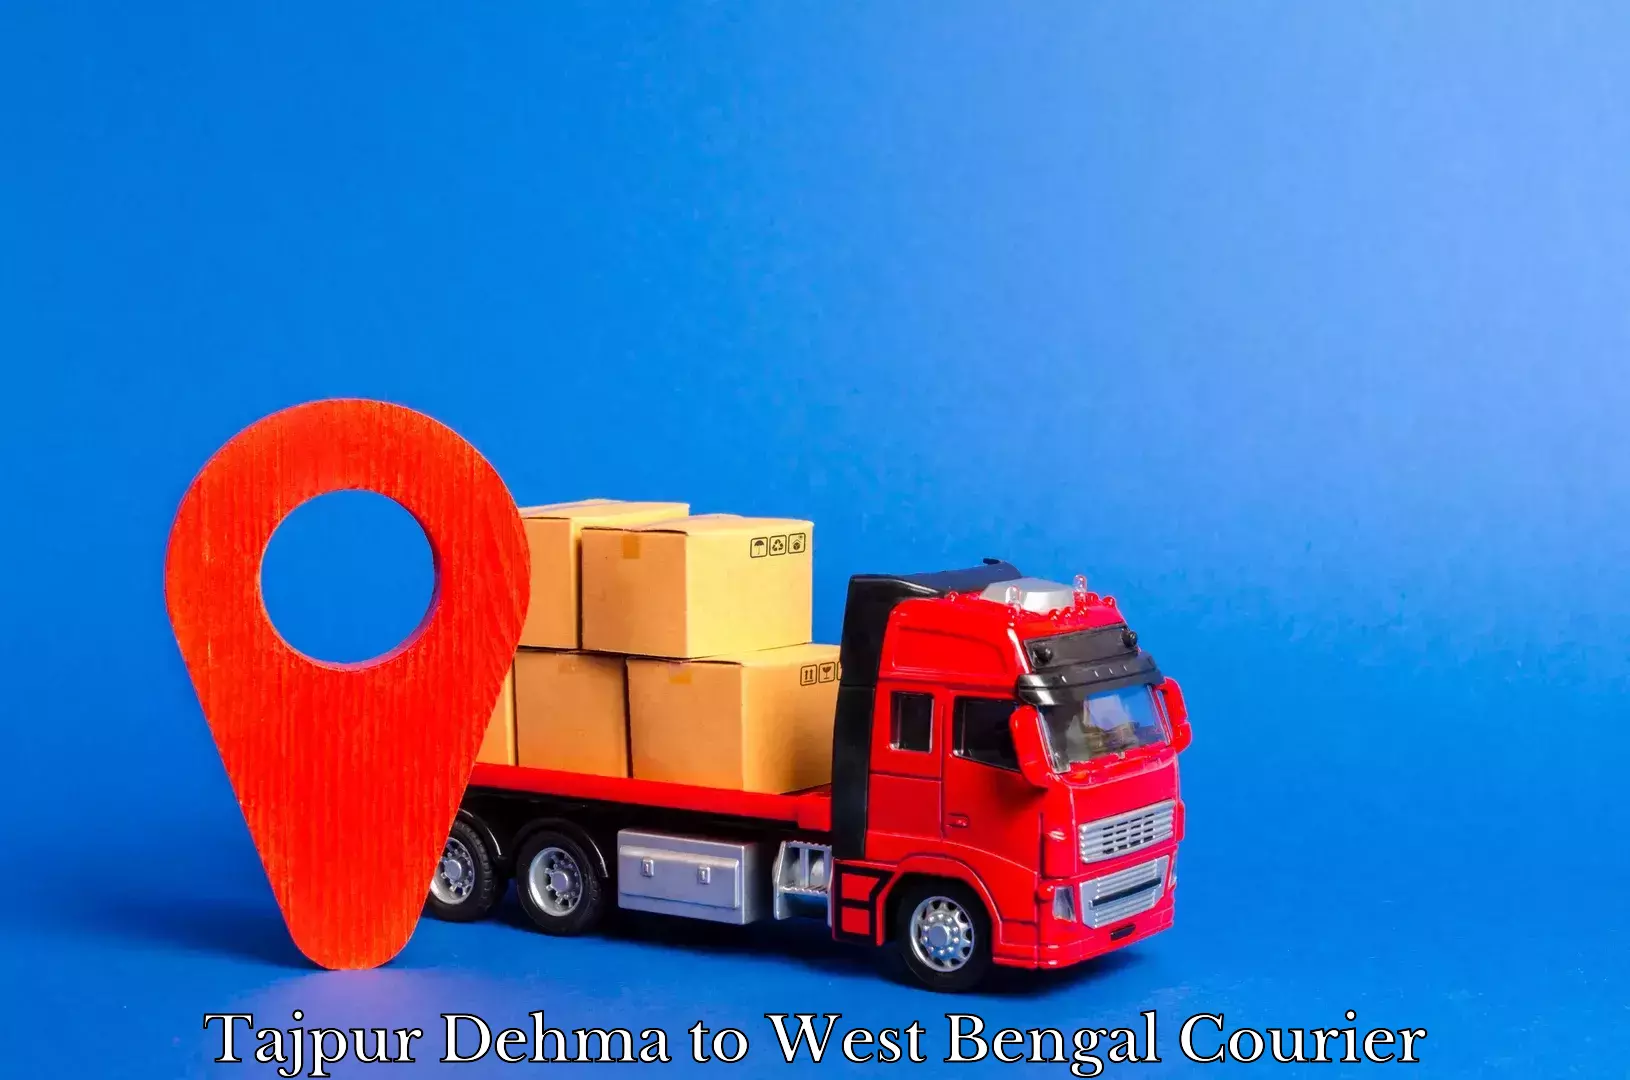 Personal parcel delivery Tajpur Dehma to West Bengal